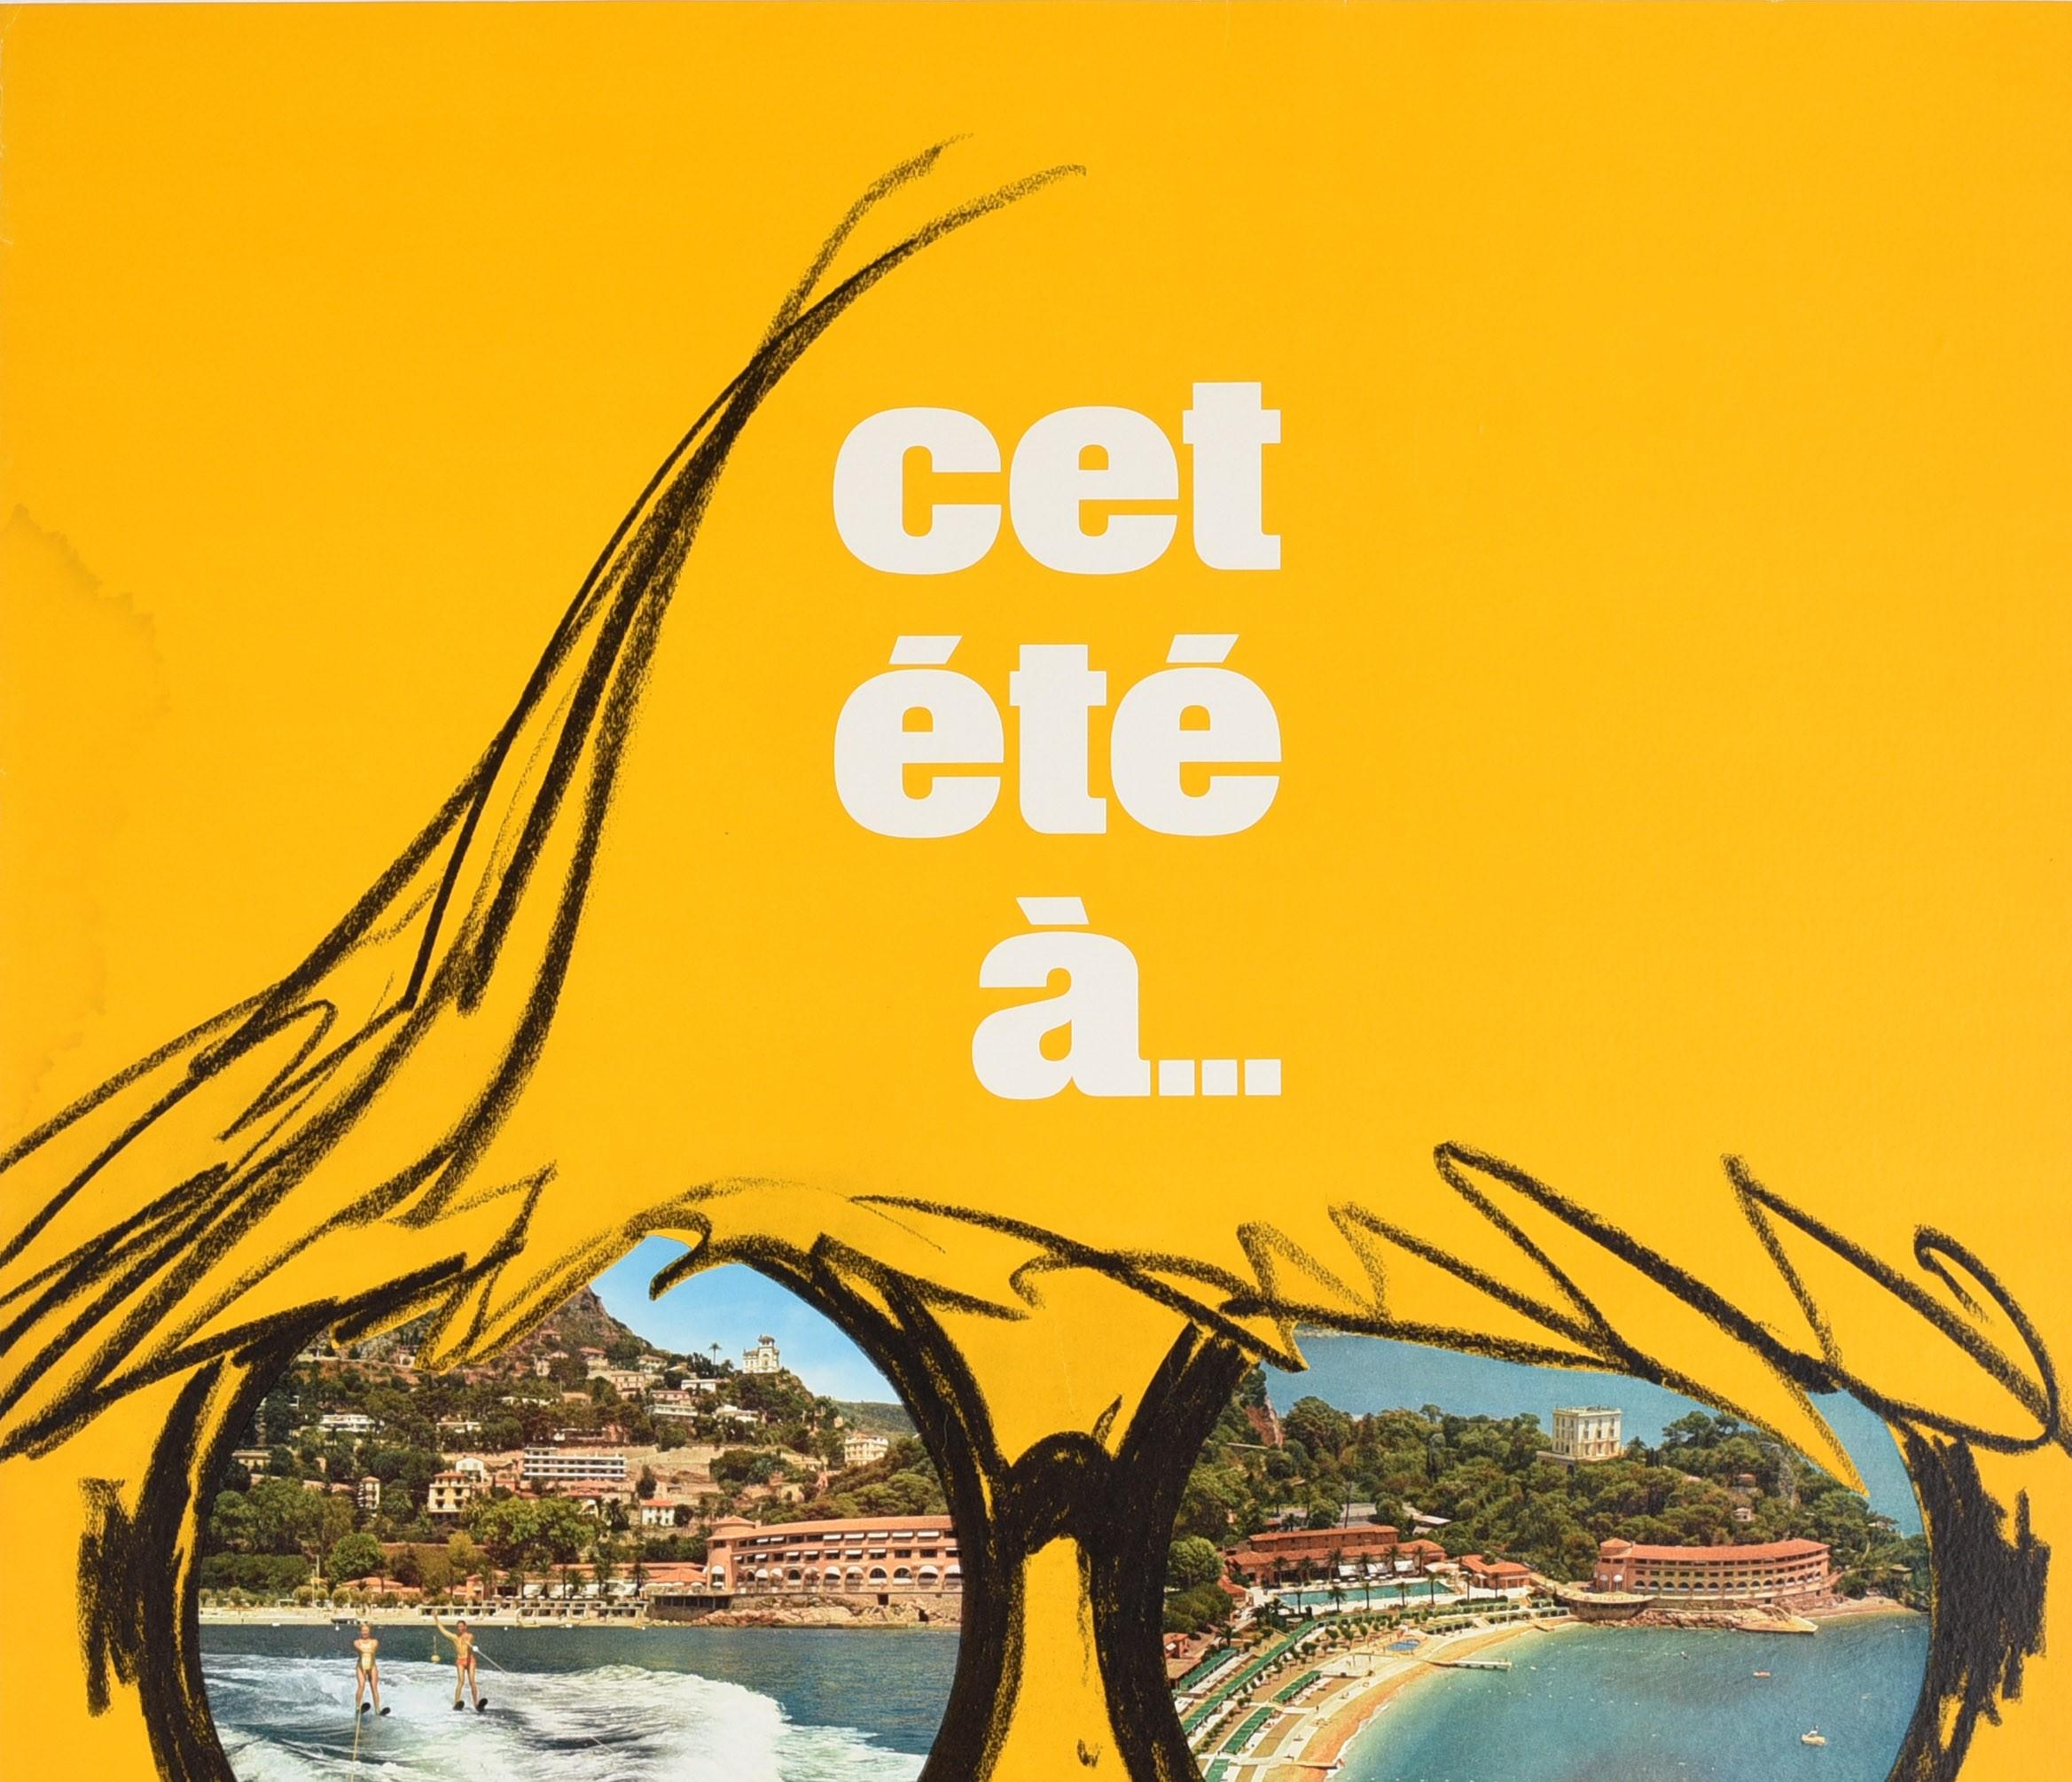 Original vintage travel poster for This summer in... Cet ete a... Monte Carlo featuring a great design showing photos of two people water-skiing and a view of the Monte Carlo Country Club resort with the sandy beach in front of hills on the French